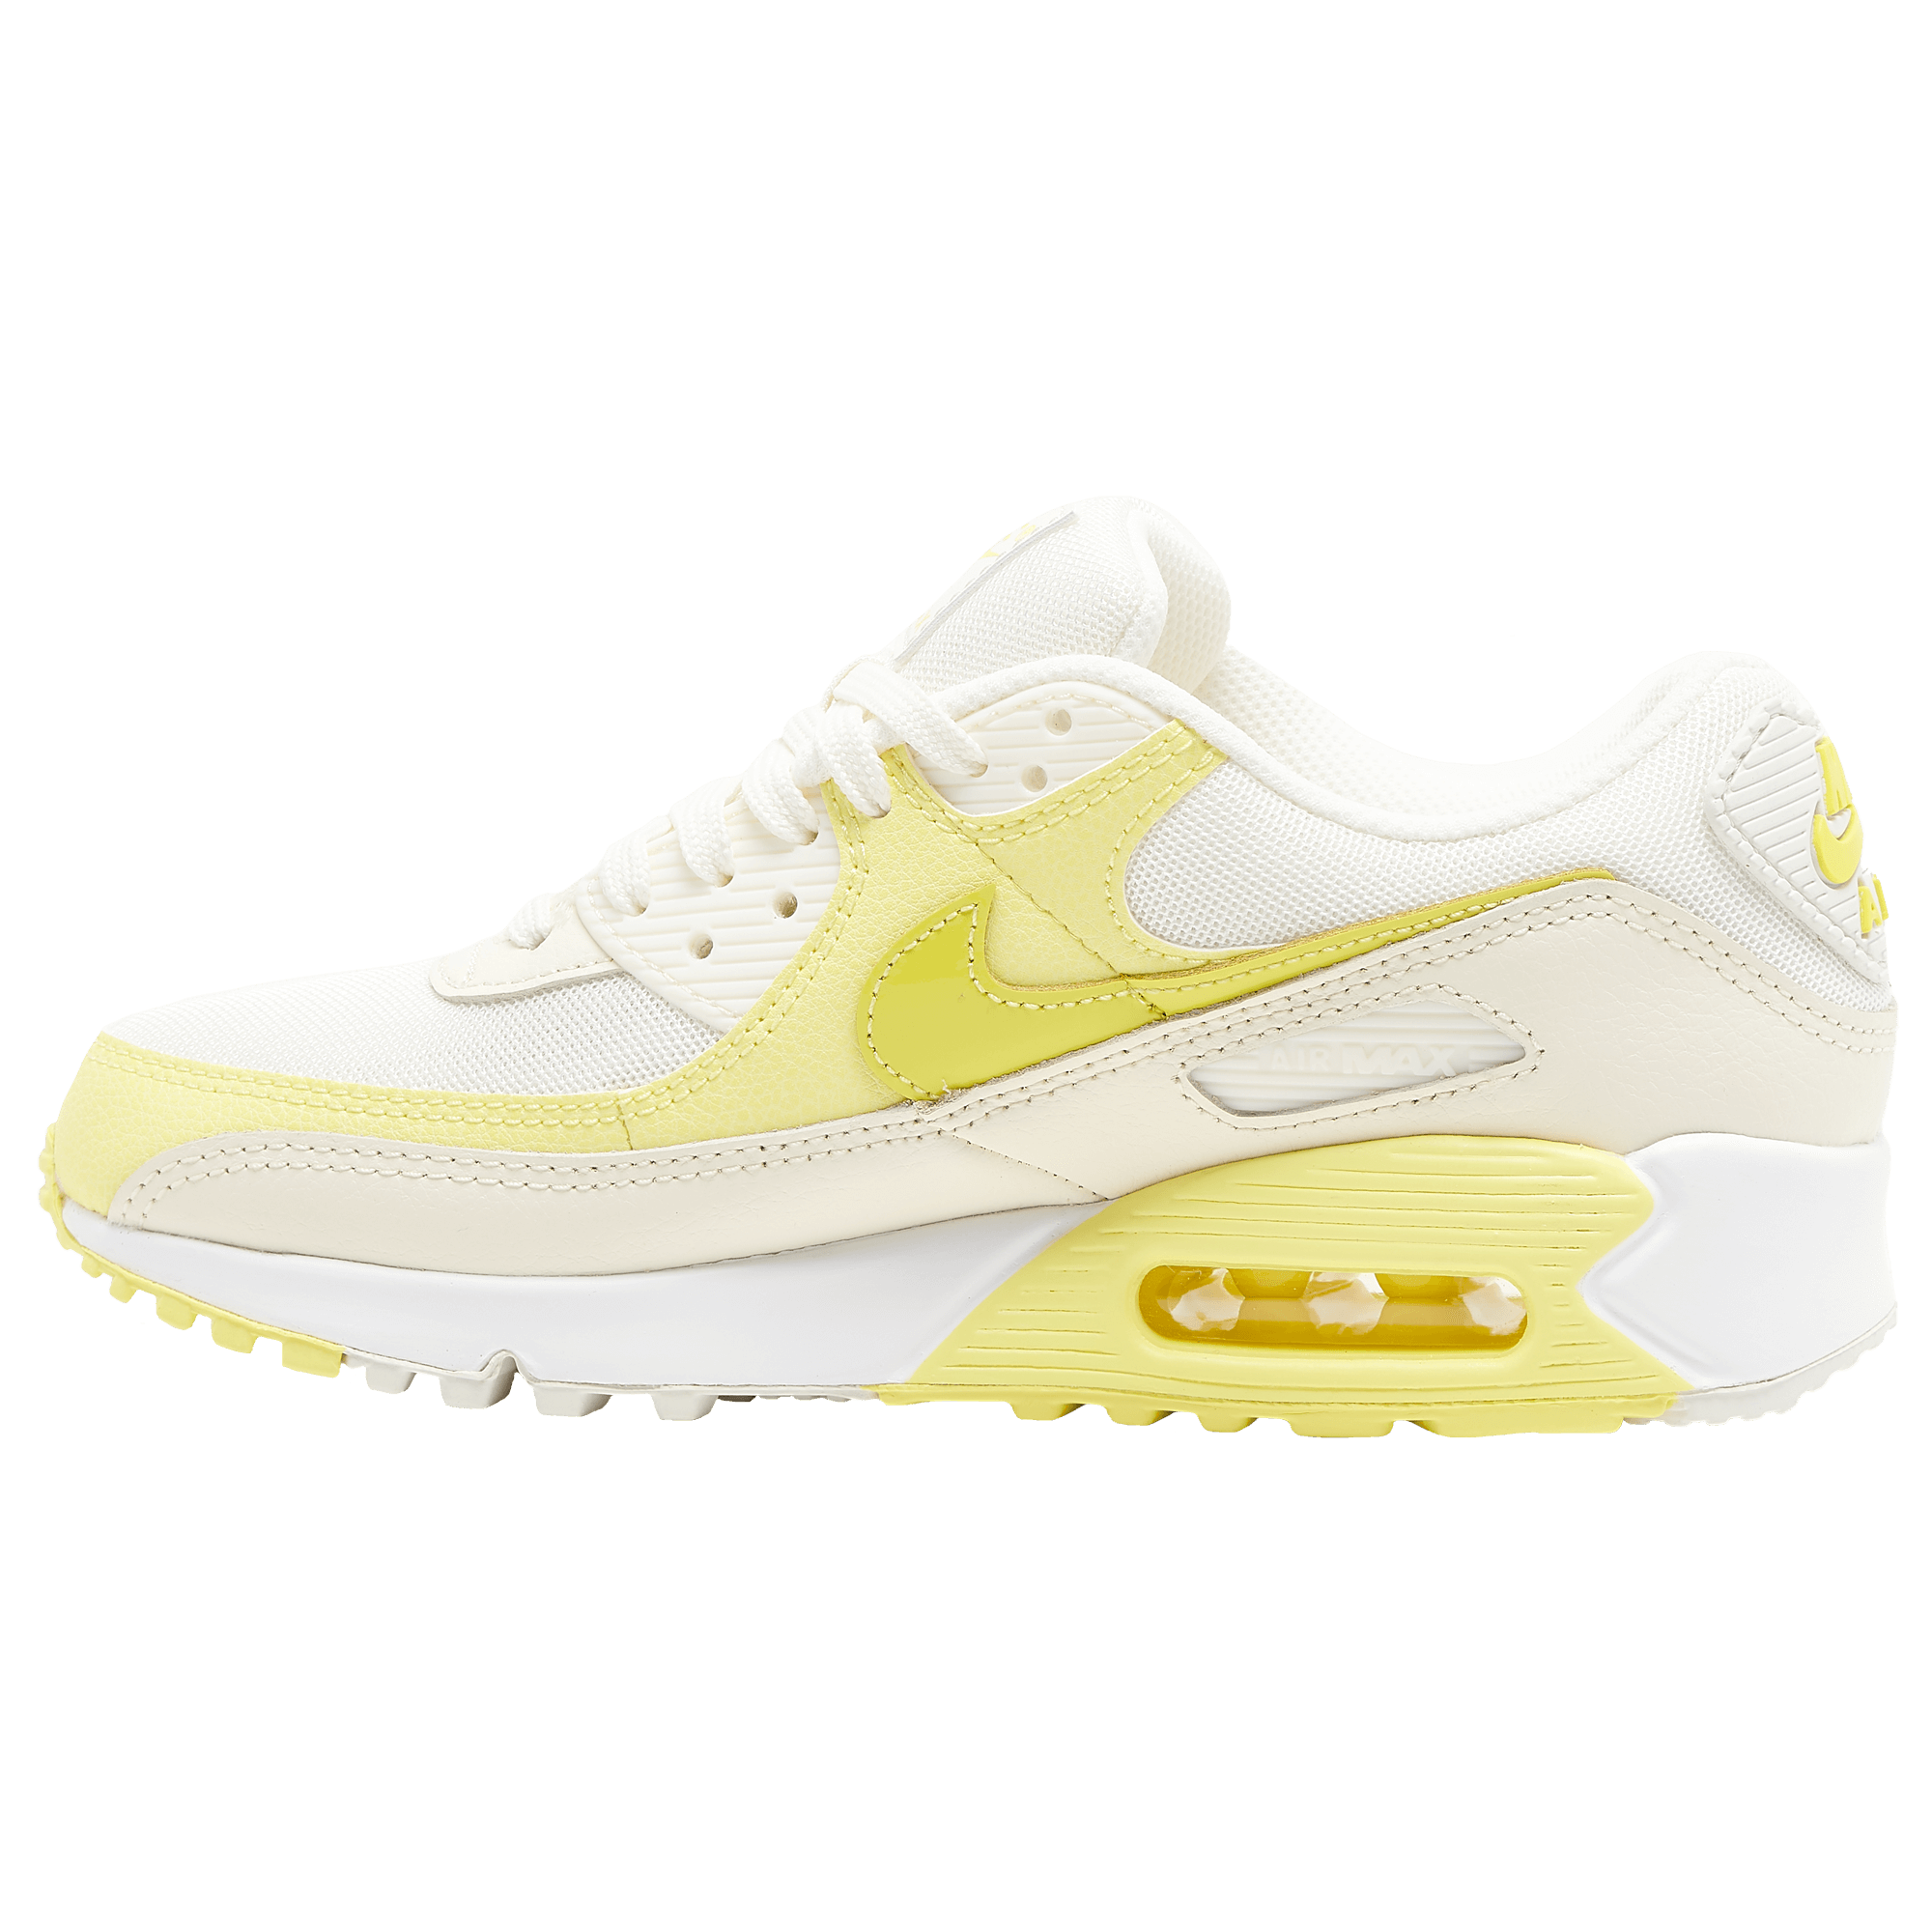 CNK-Princess-Charming-Pack-Air-Max-90-Side-2.png